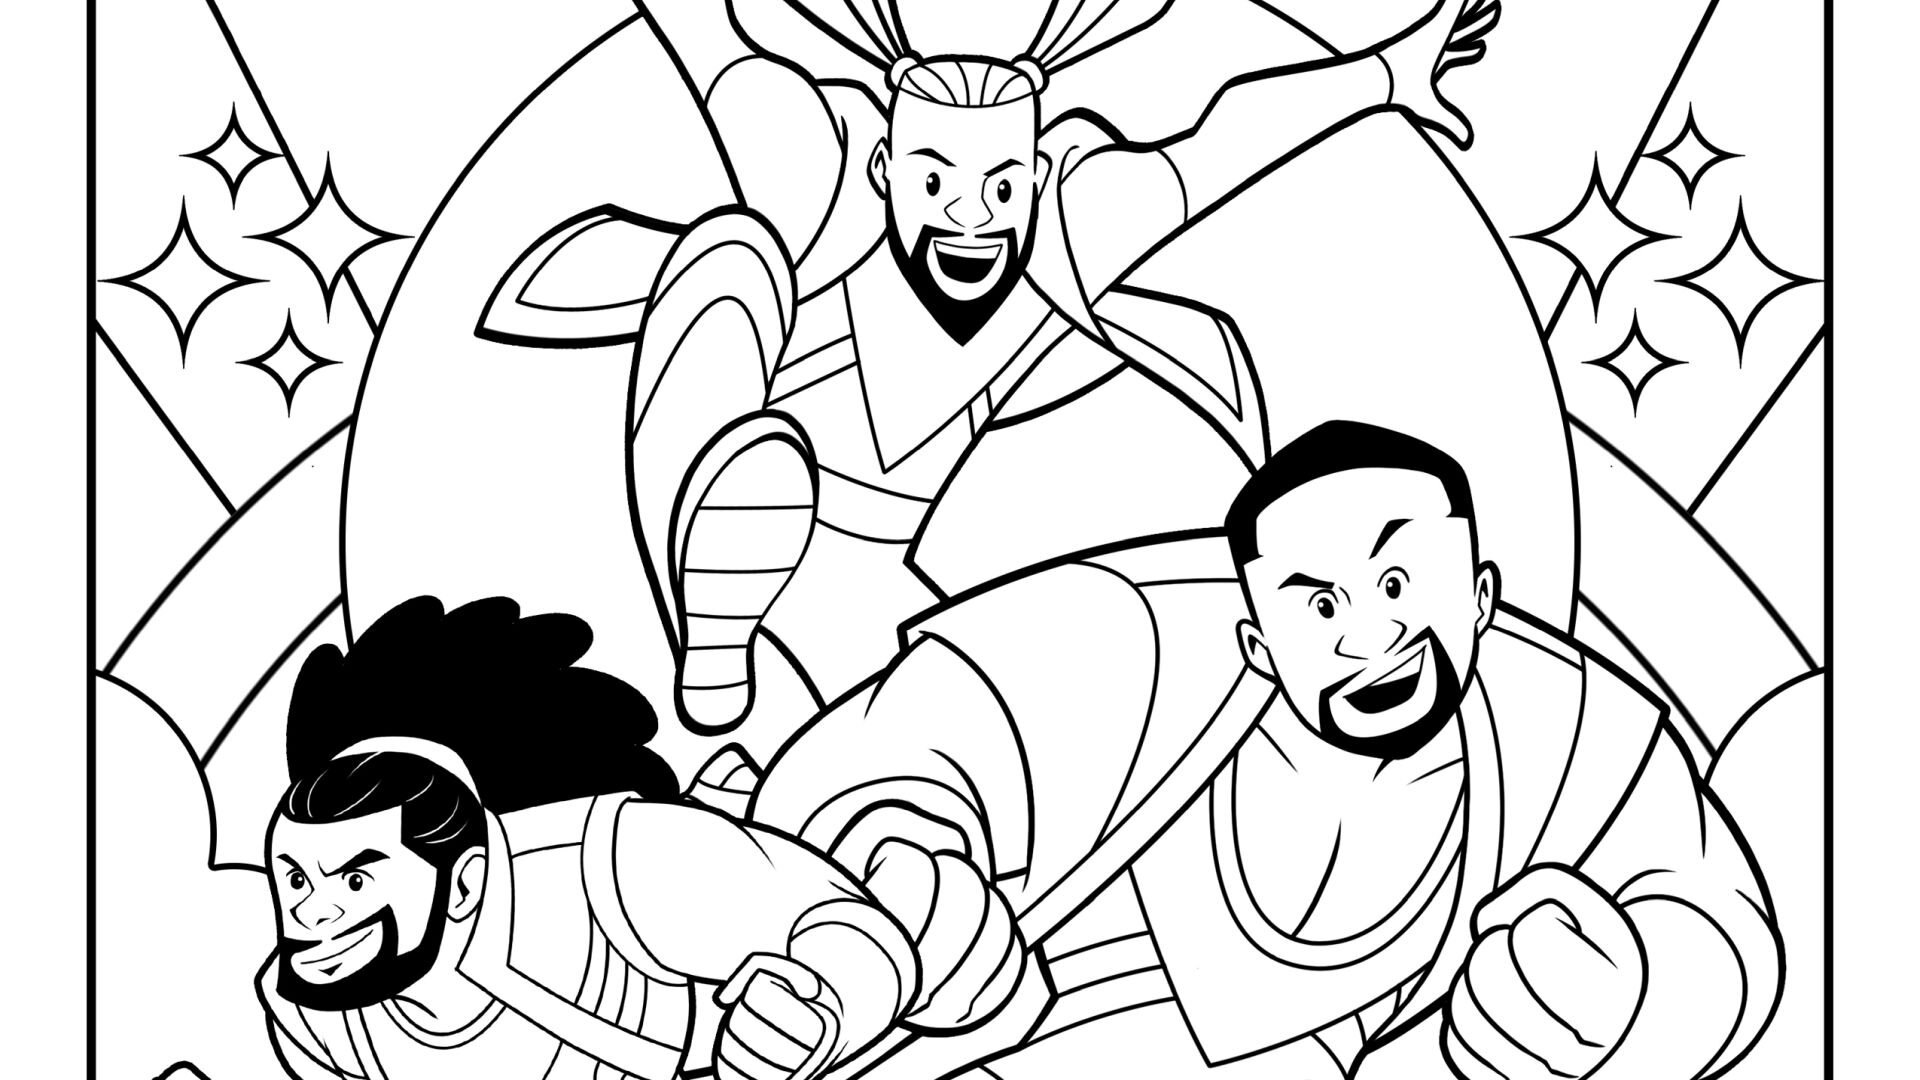 Get your wwe fix with these free the new day coloring pages â